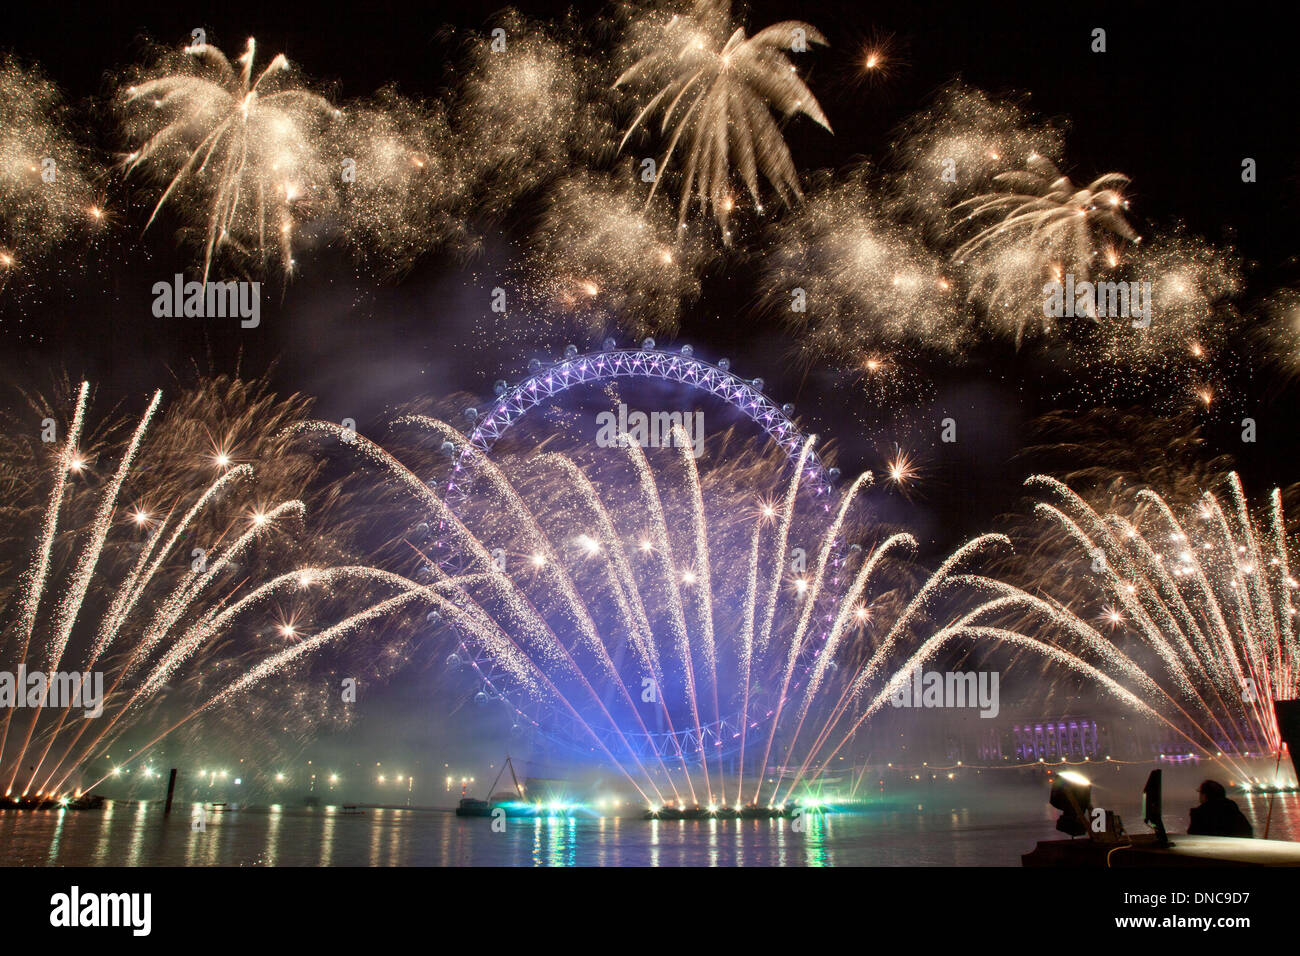 Firework images from 2012/2013. This years celebrations will include a 'multi-sensory' firework display. there will be a host of special effects involving sight, sound, fruit flavours and fruit smells. Stock Photo